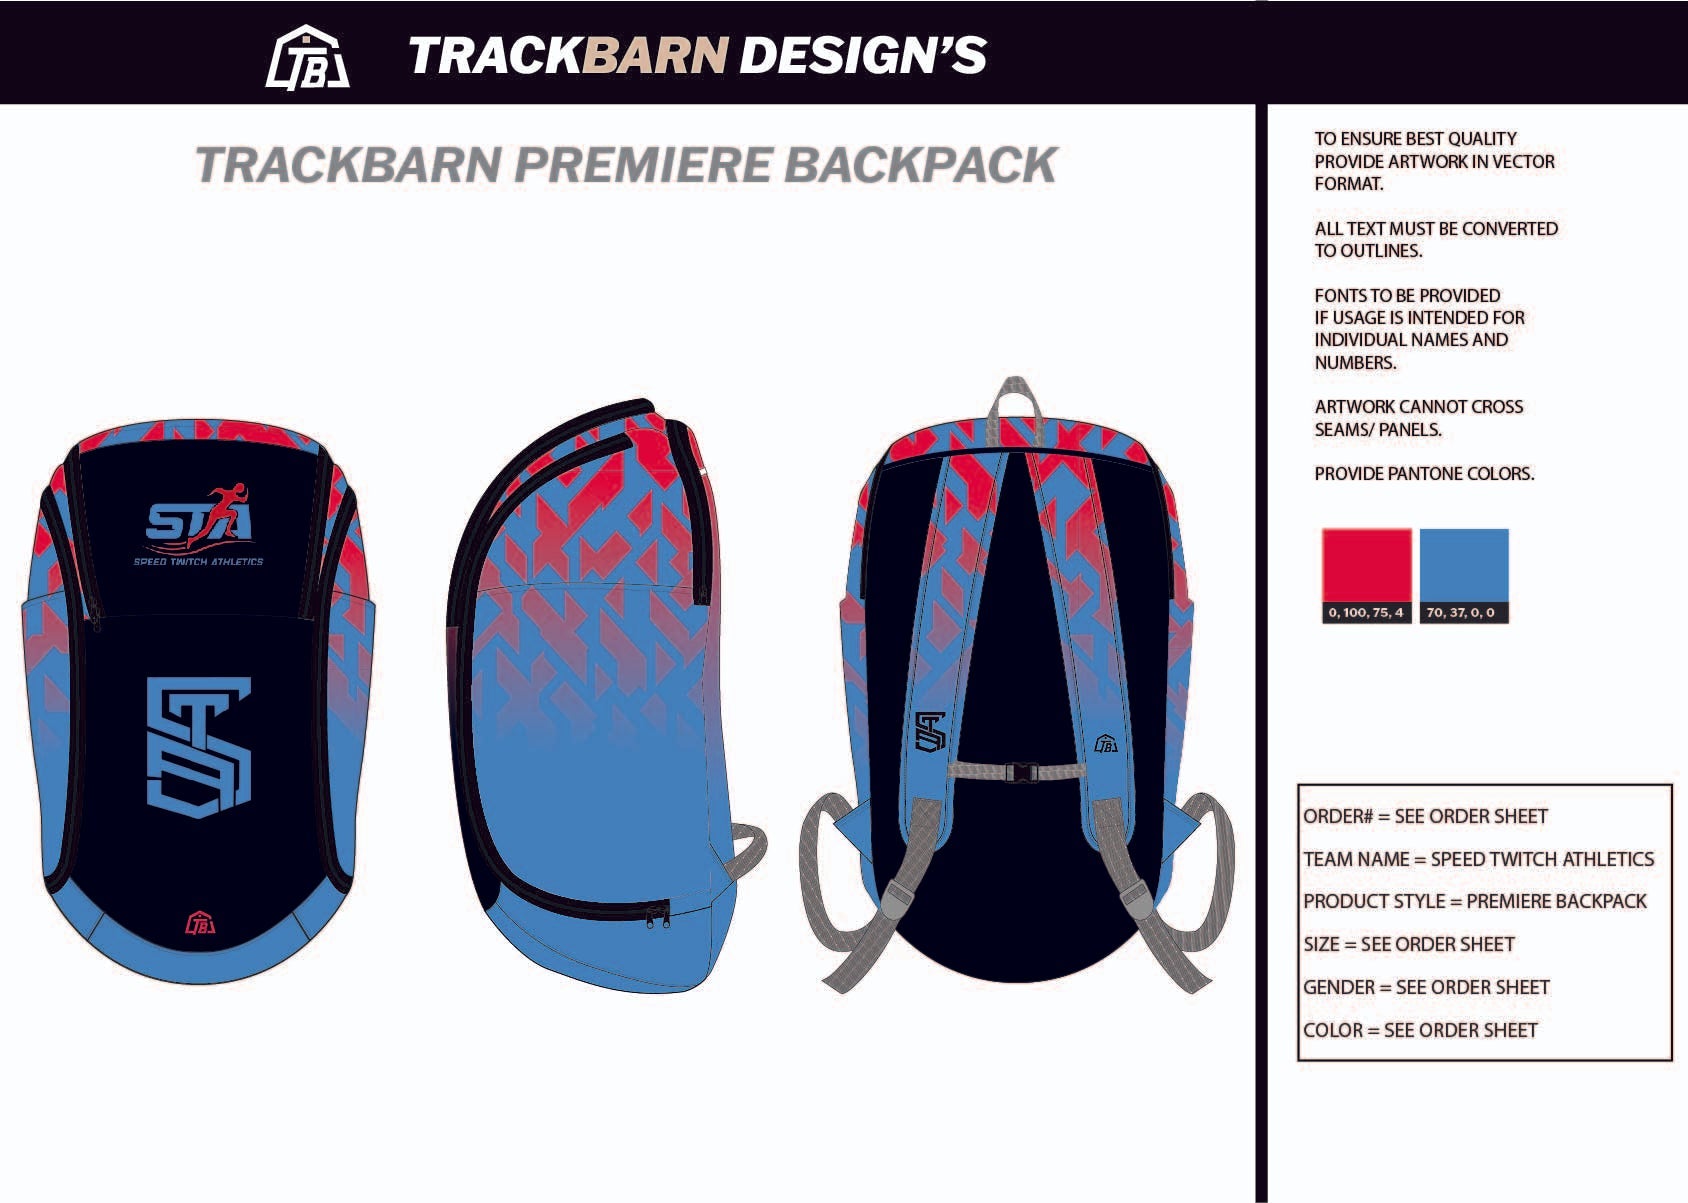 Speed-Twitch-Athletics Backpack